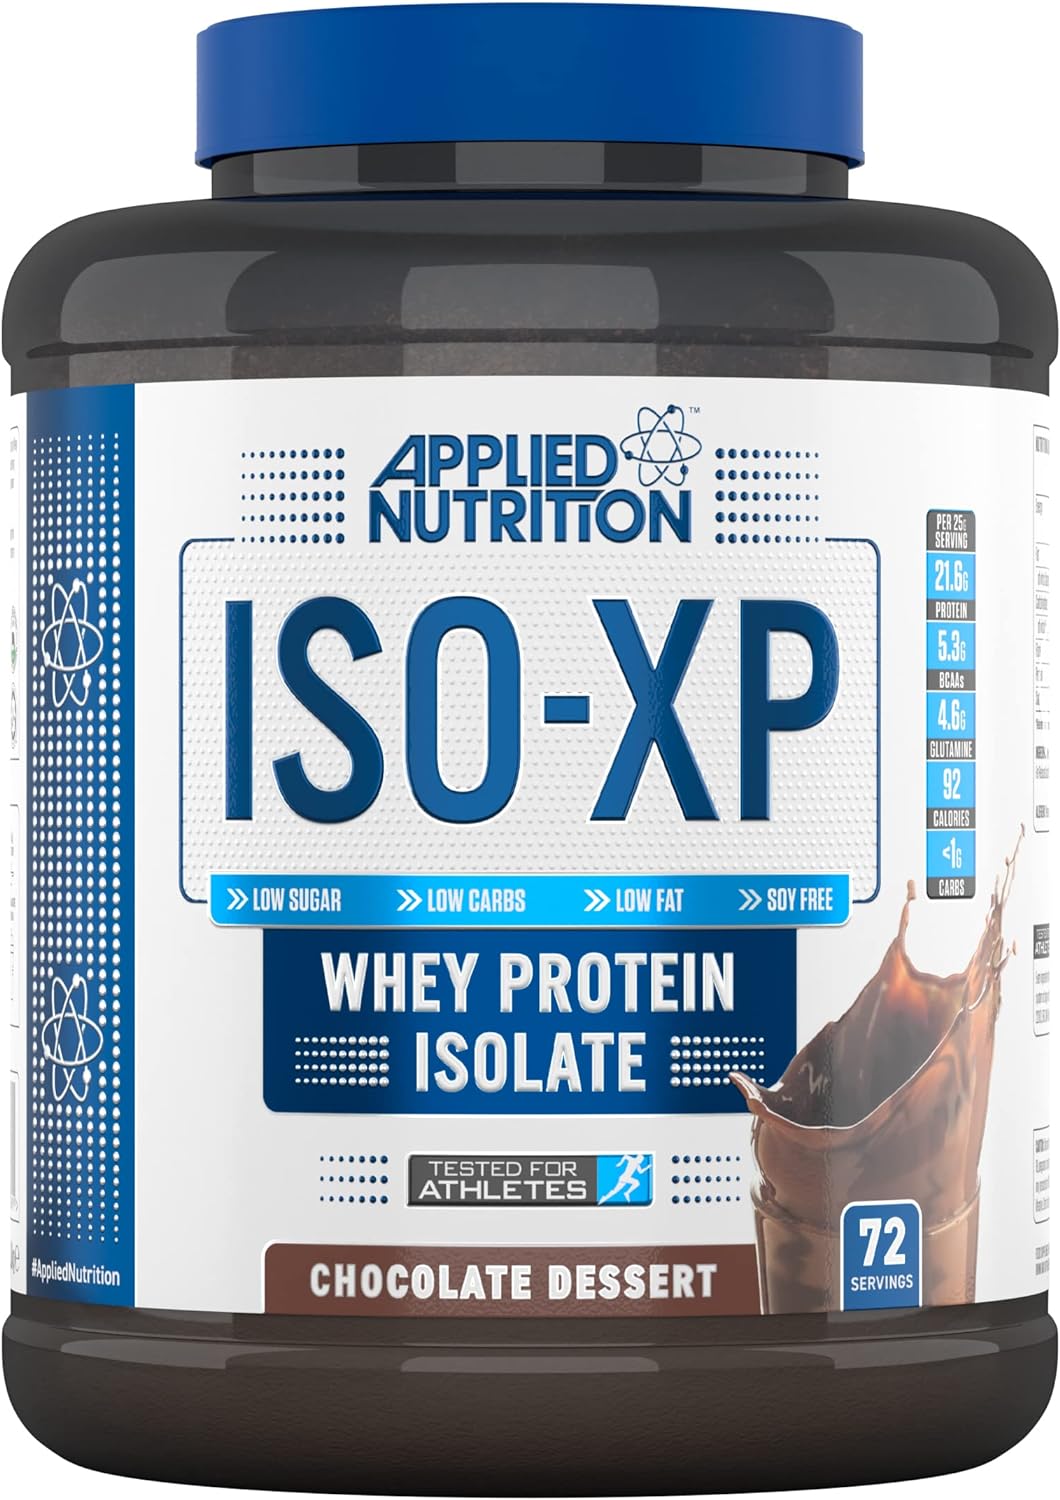 Applied Nutrition ISO-XP Whey Protein Isolate Powder